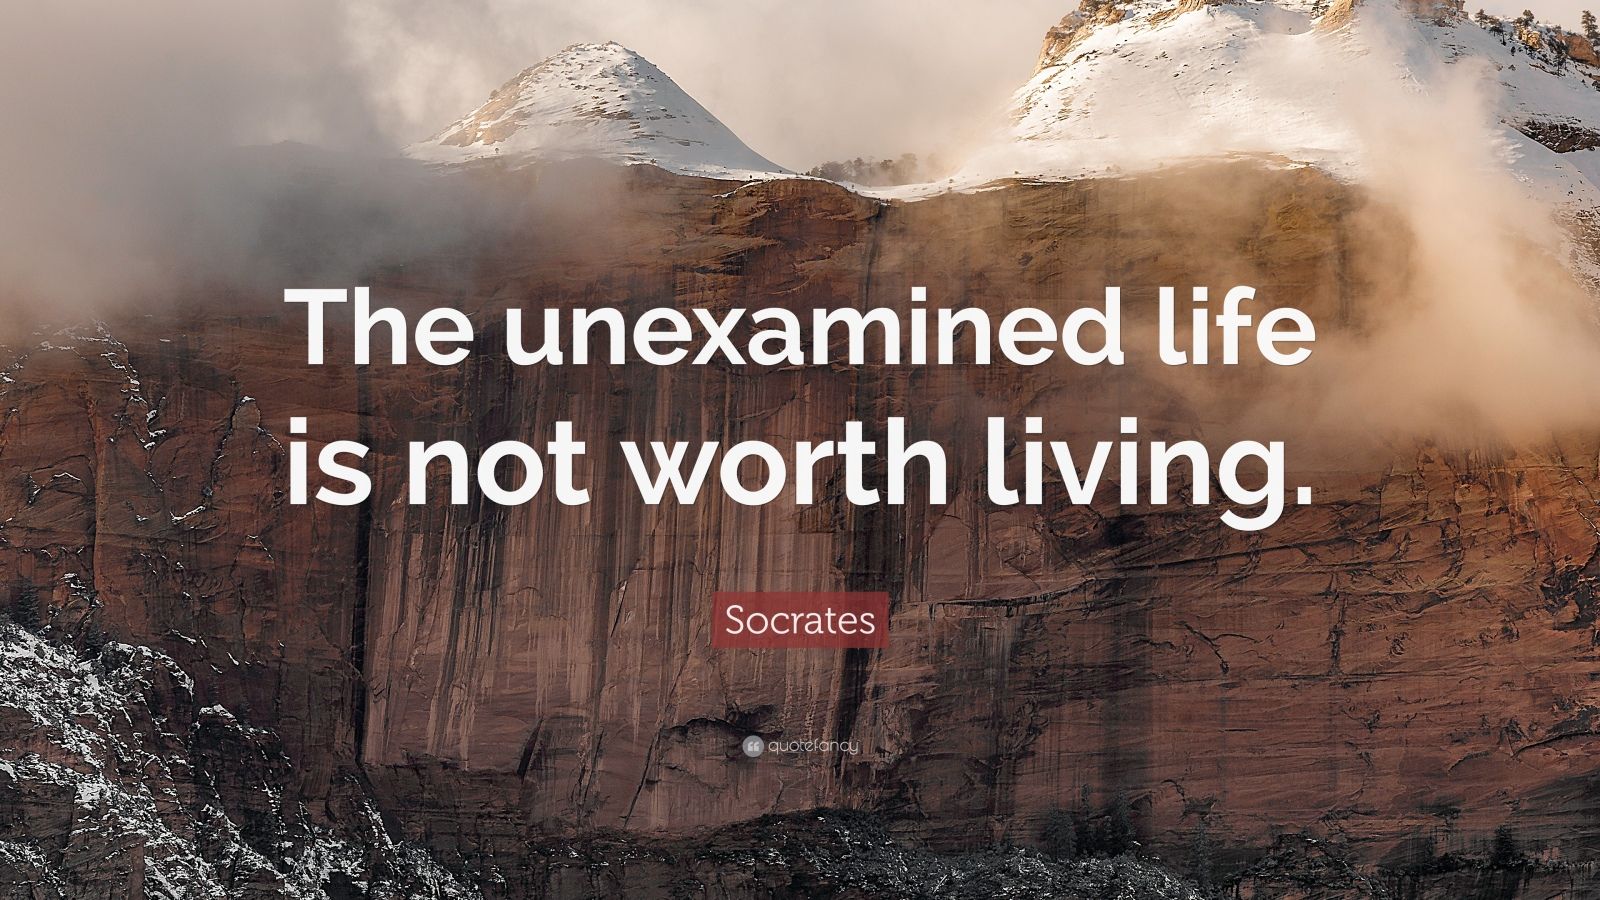 Socrates Quote: "The unexamined life is not worth living." (20 wallpapers) - Quotefancy